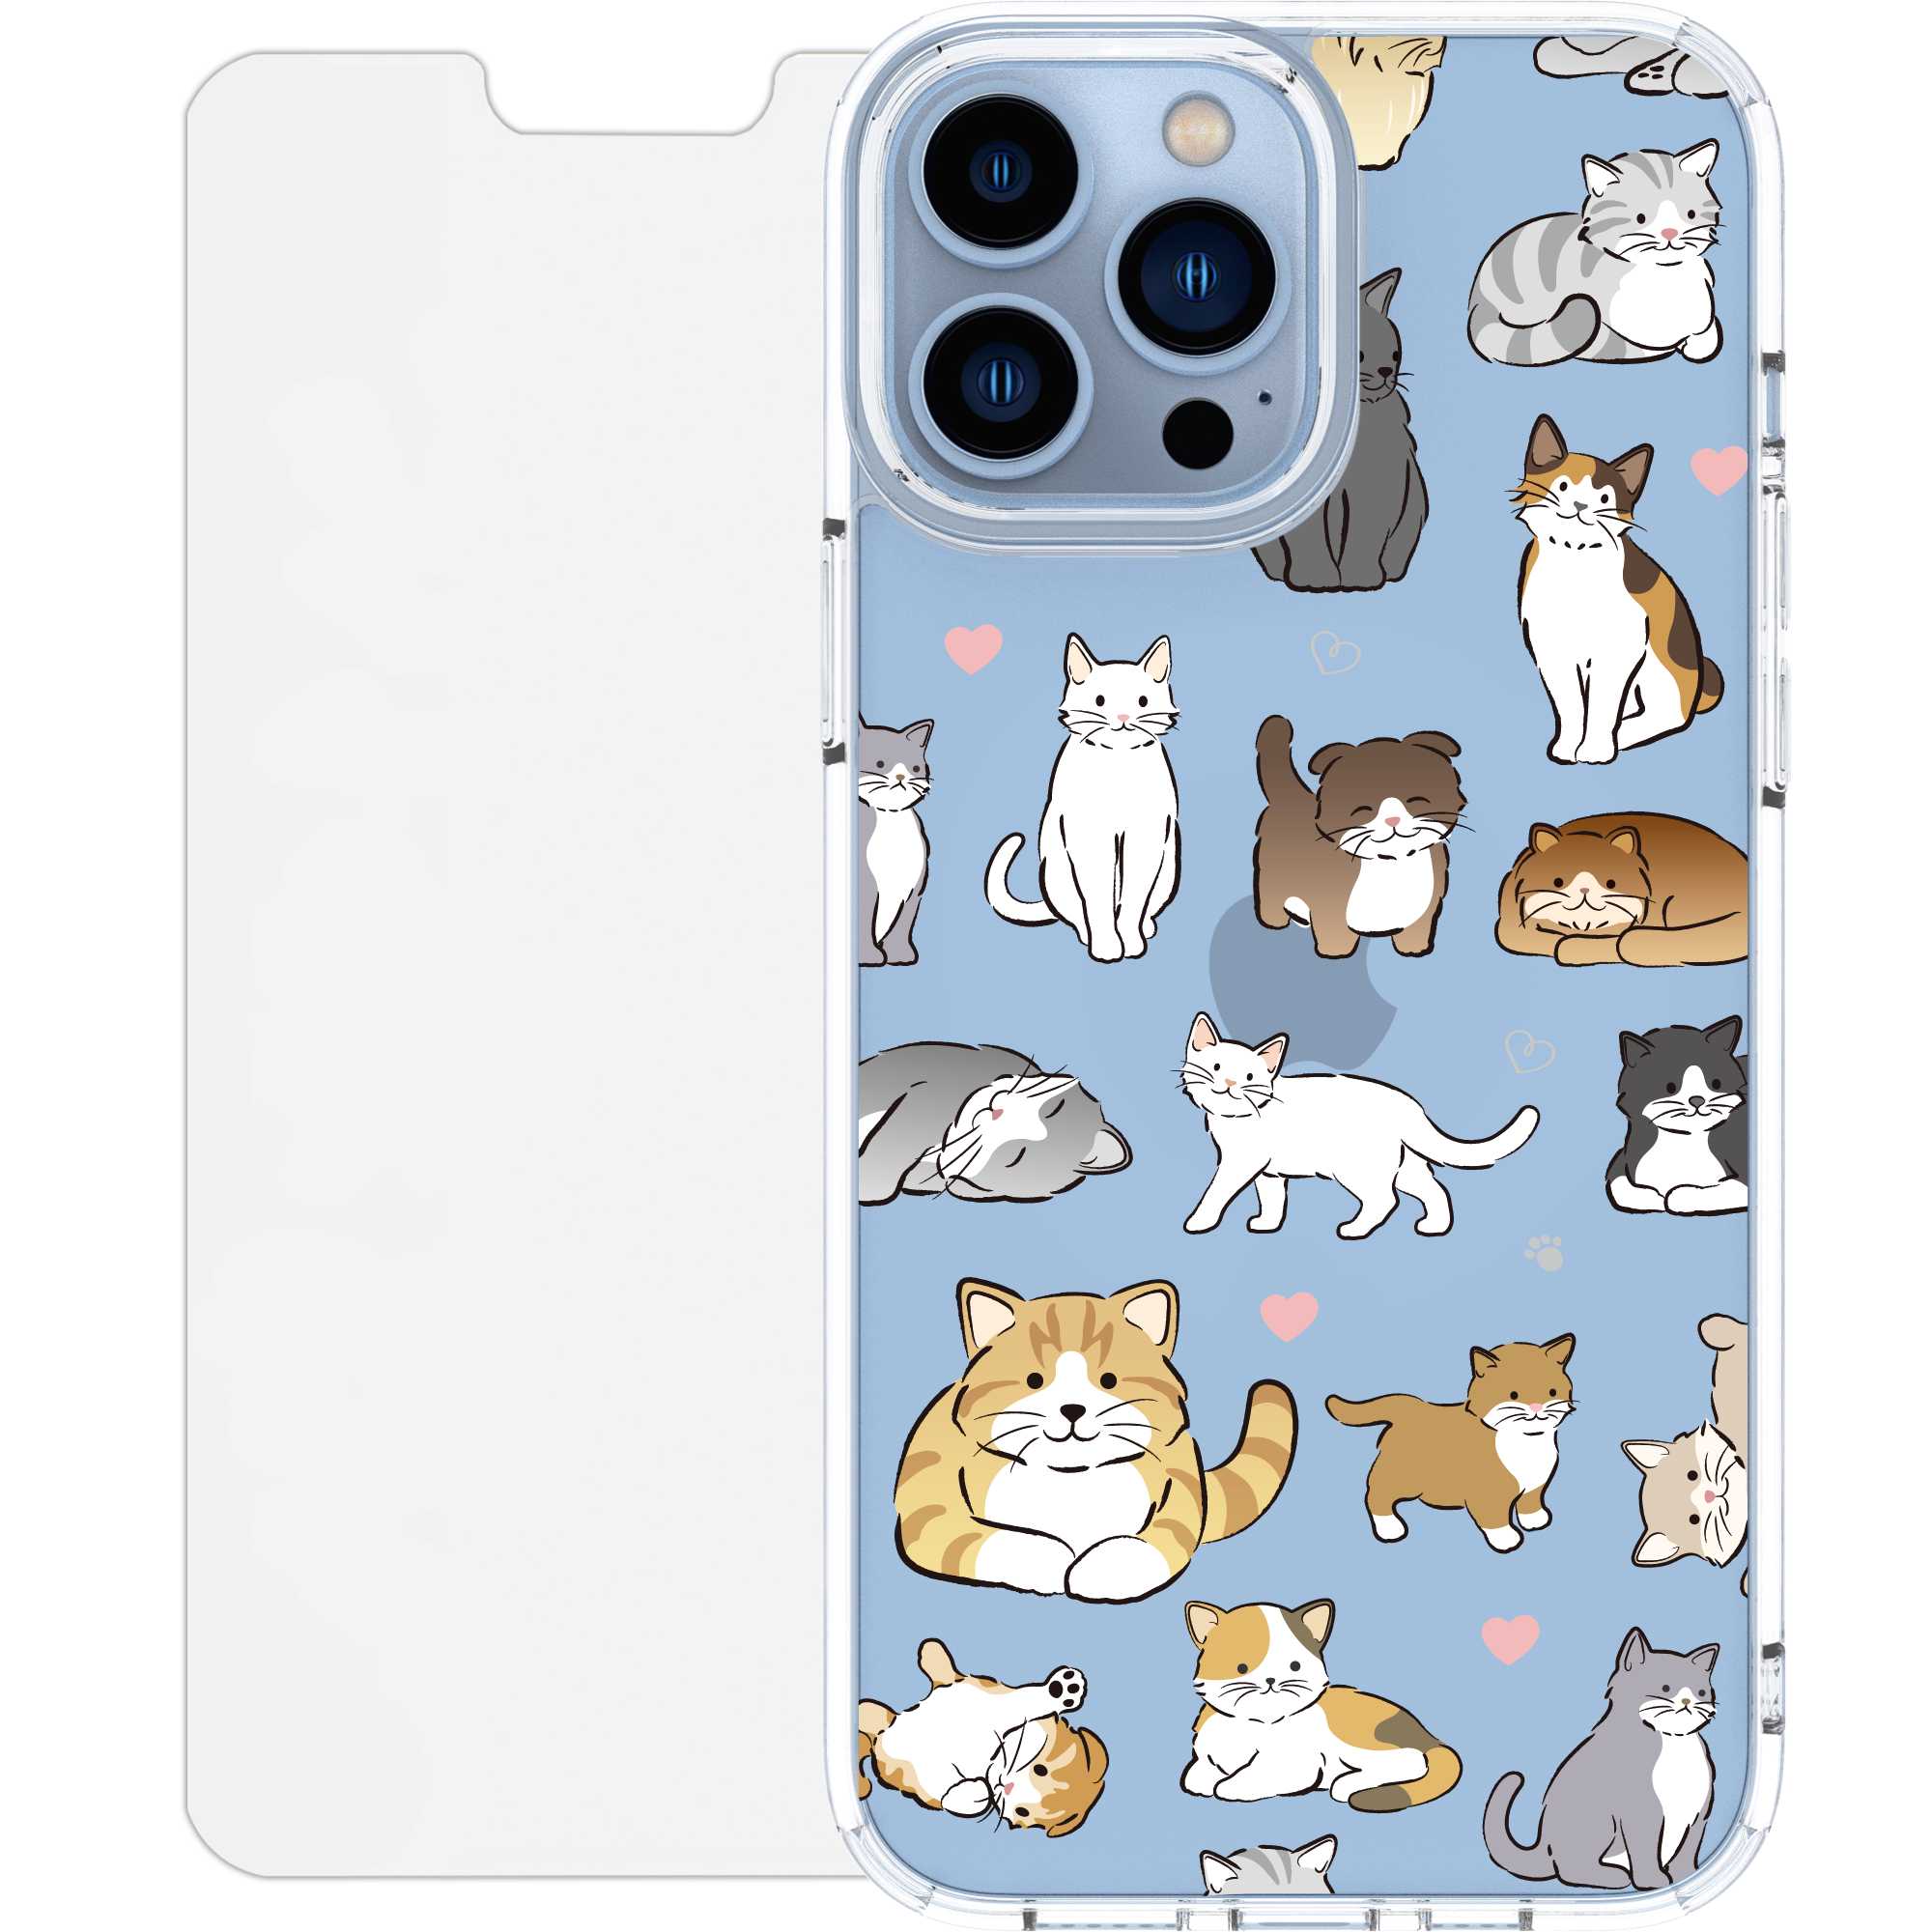 Scooch CrystalCase for iPhone 13 Pro Max CatParty Scooch CrystalCase